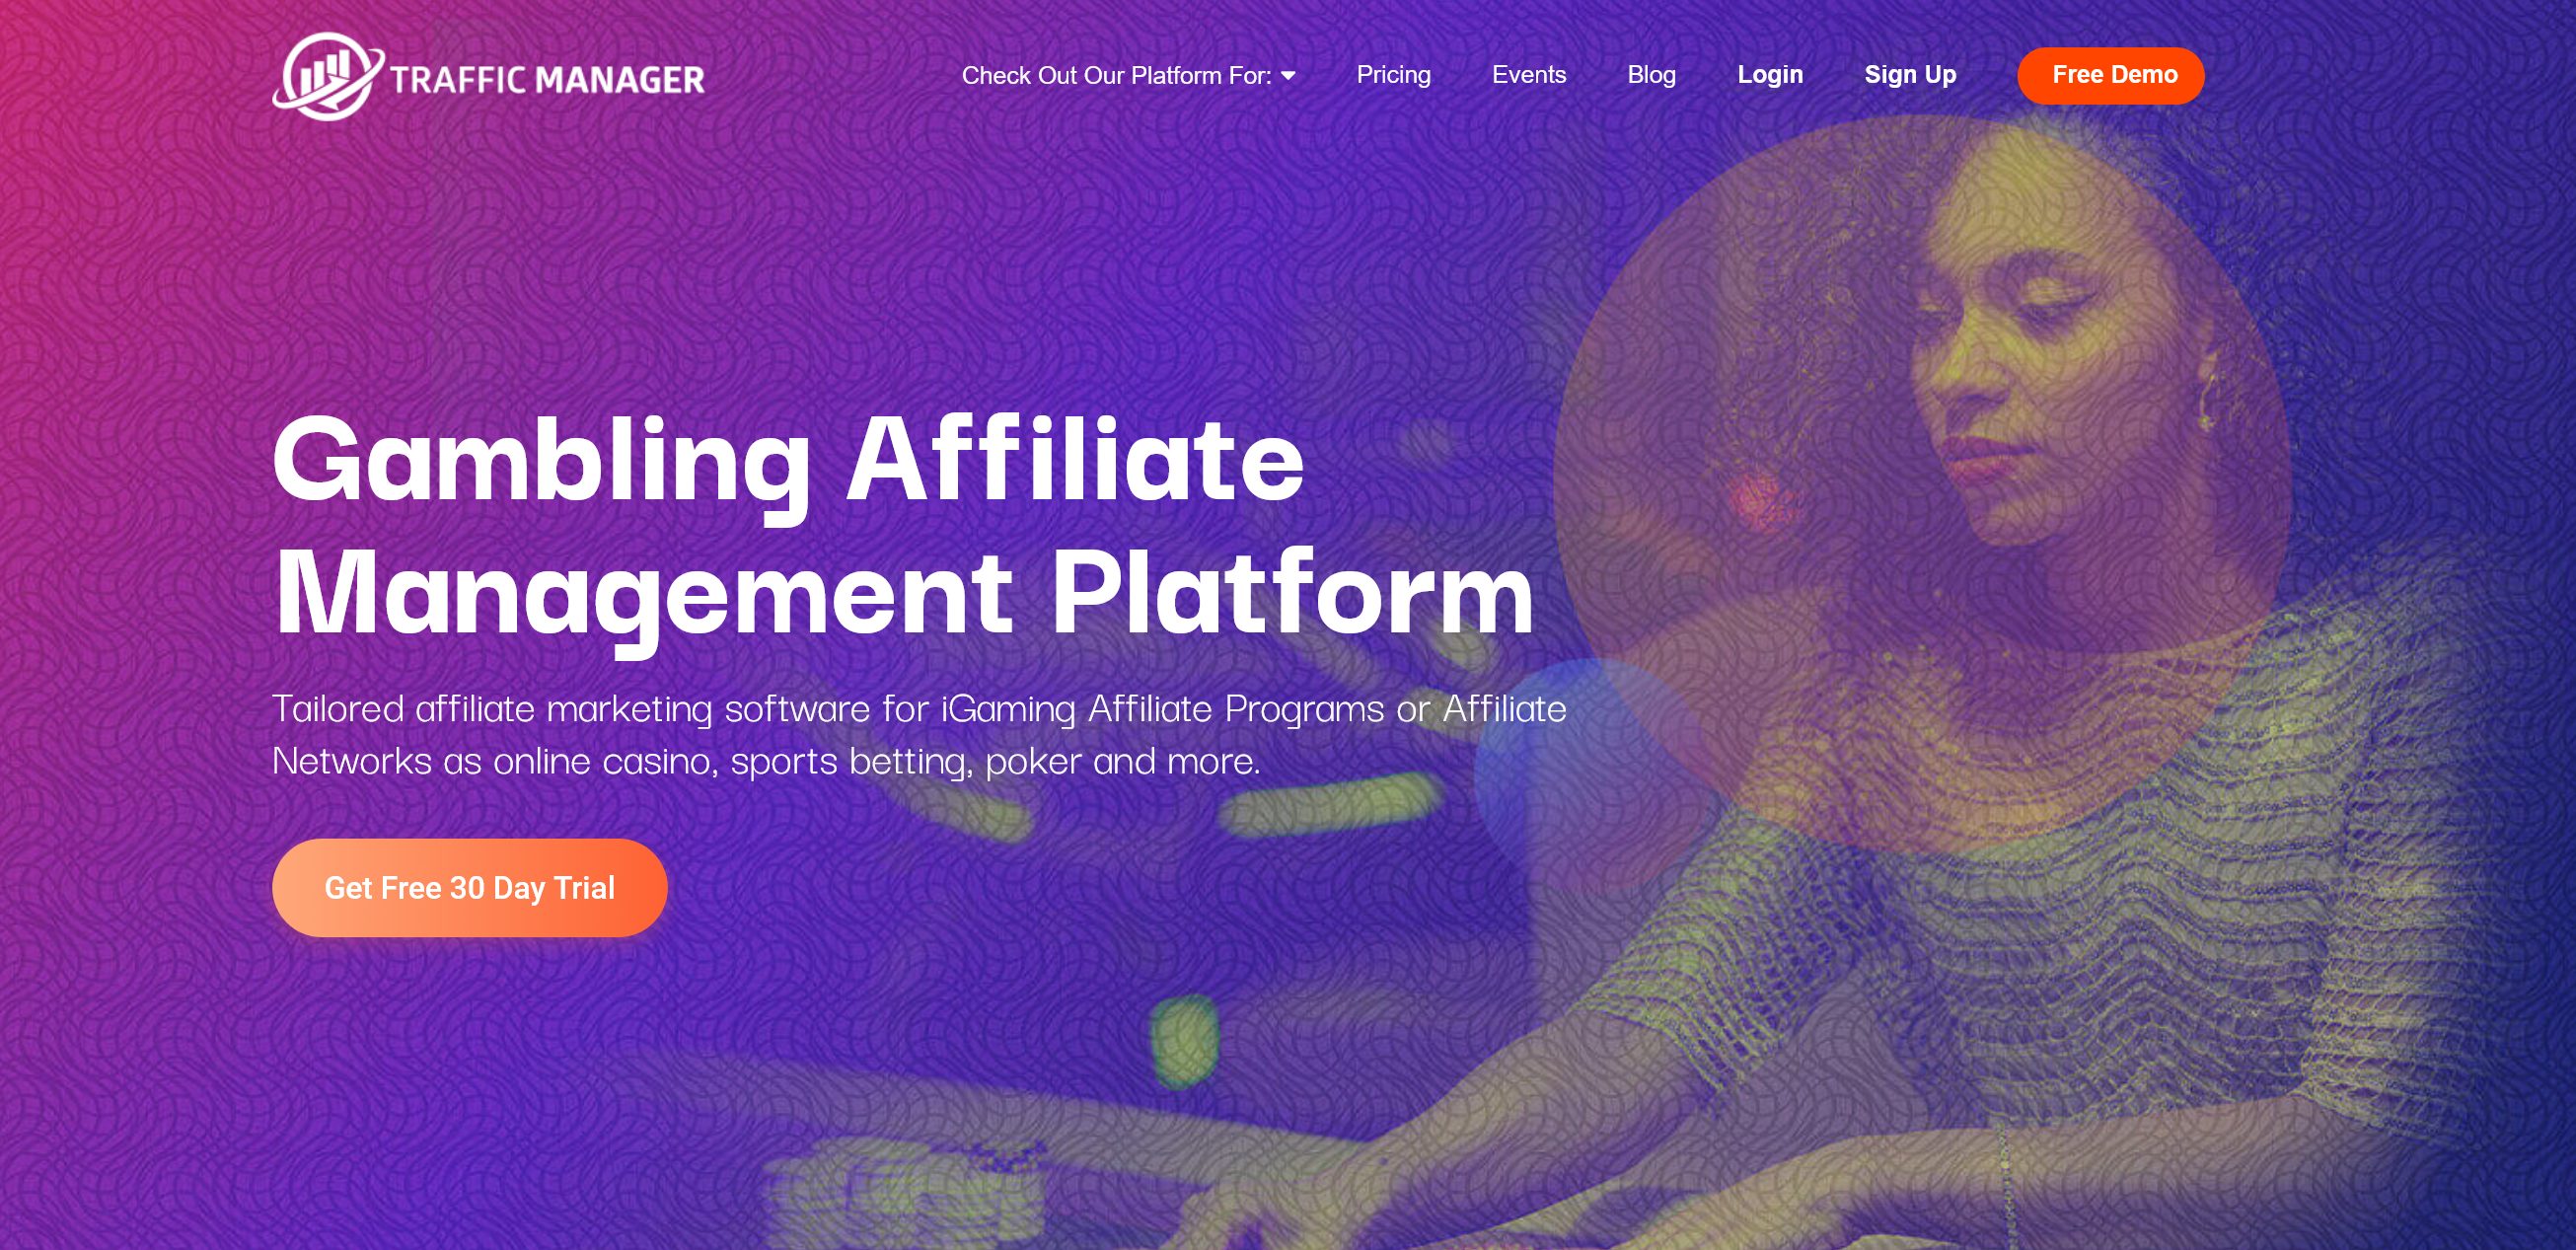 Traffic Manager - Affiliate Software for iGaming Industry